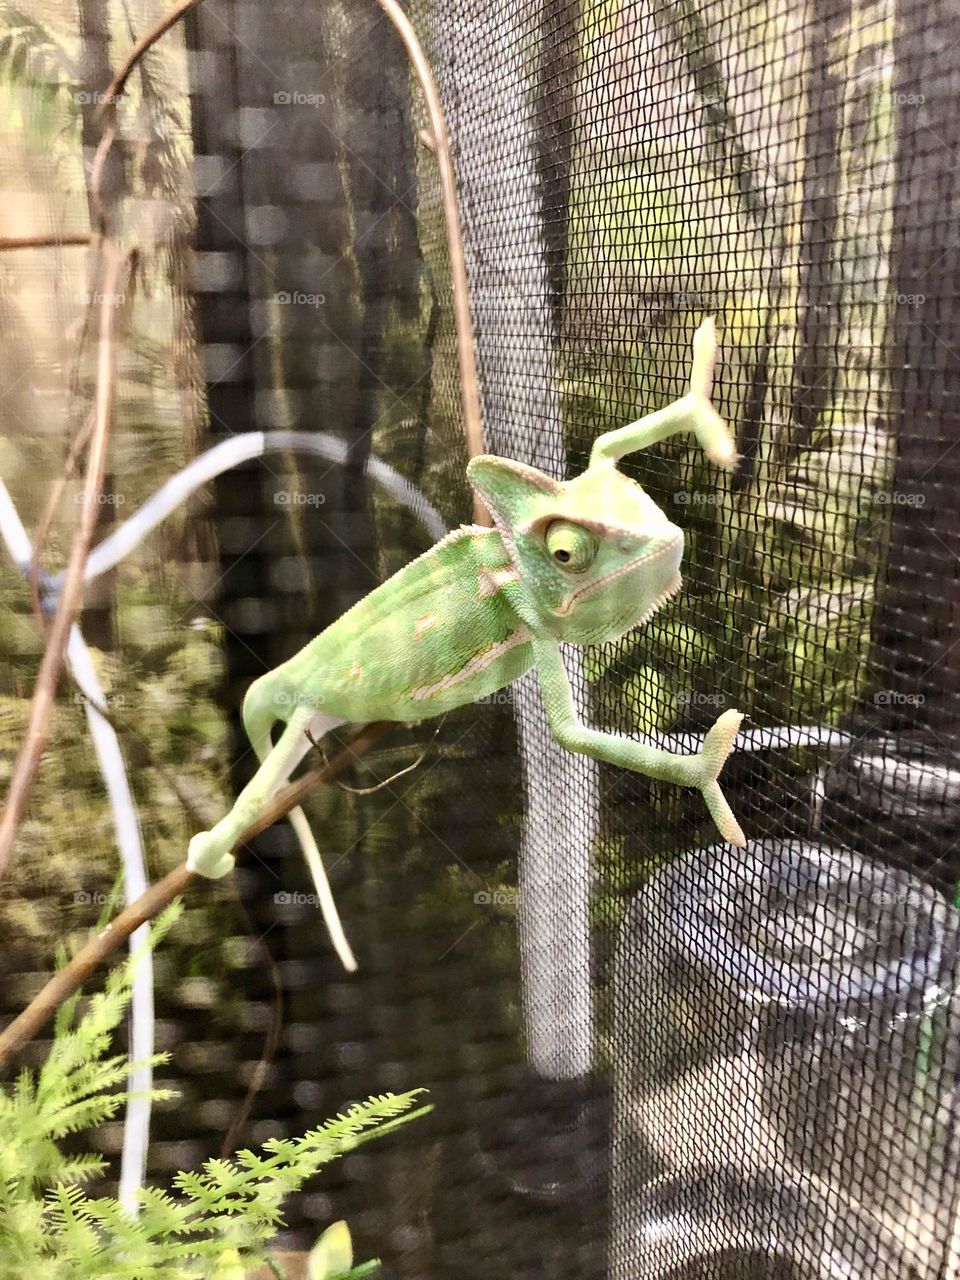 At the pet store - checking out the cute green chameleon 🌿